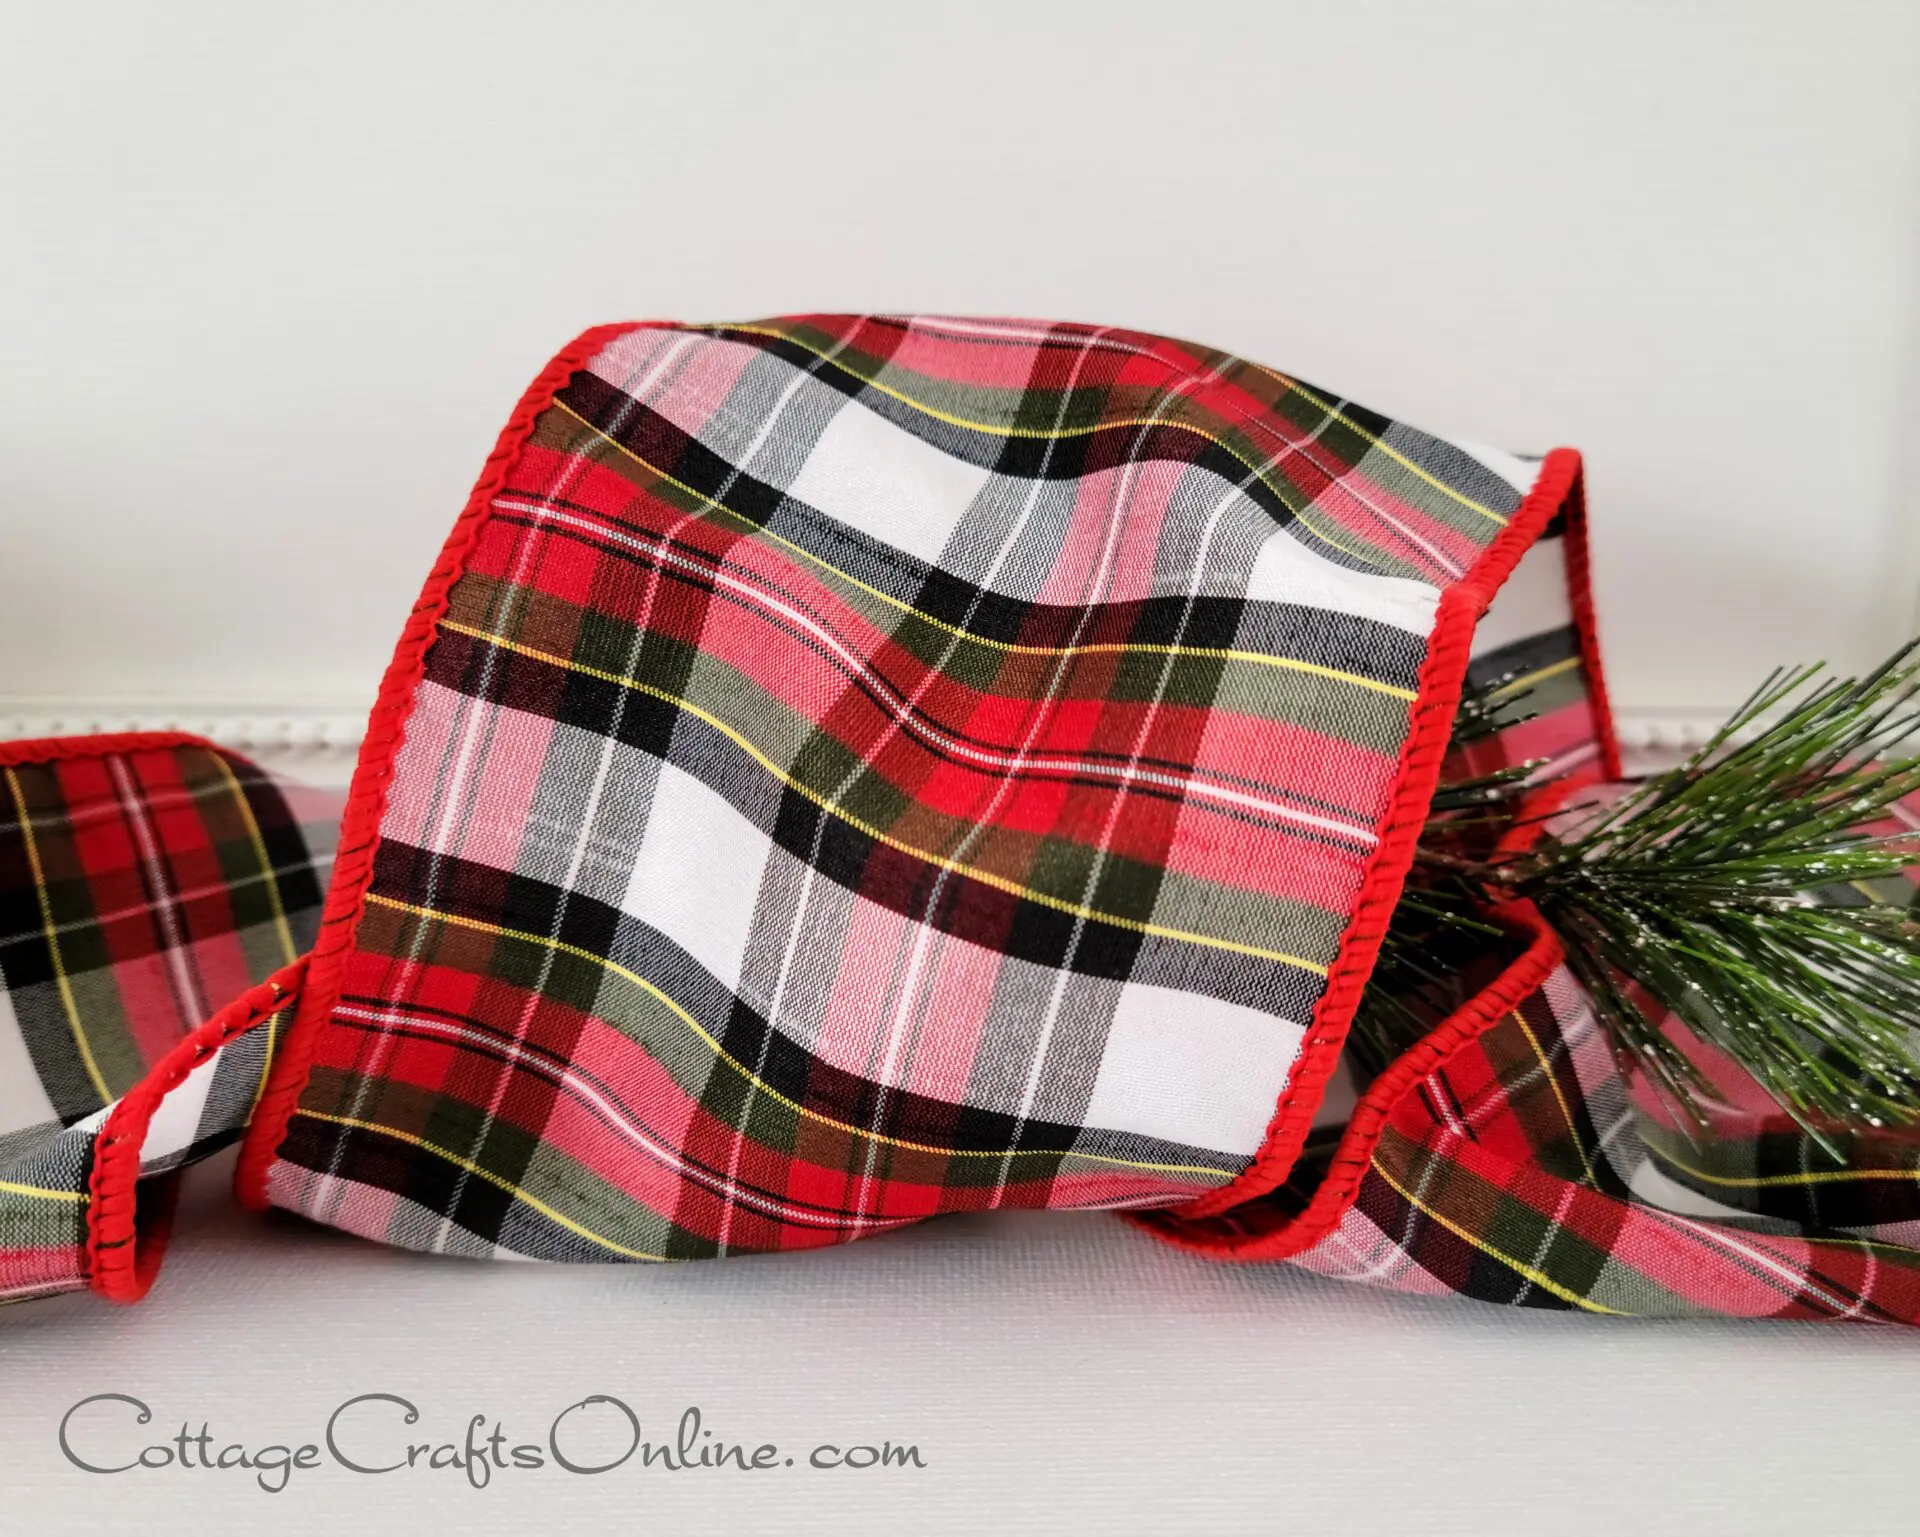 A close up of a red and white plaid ribbon